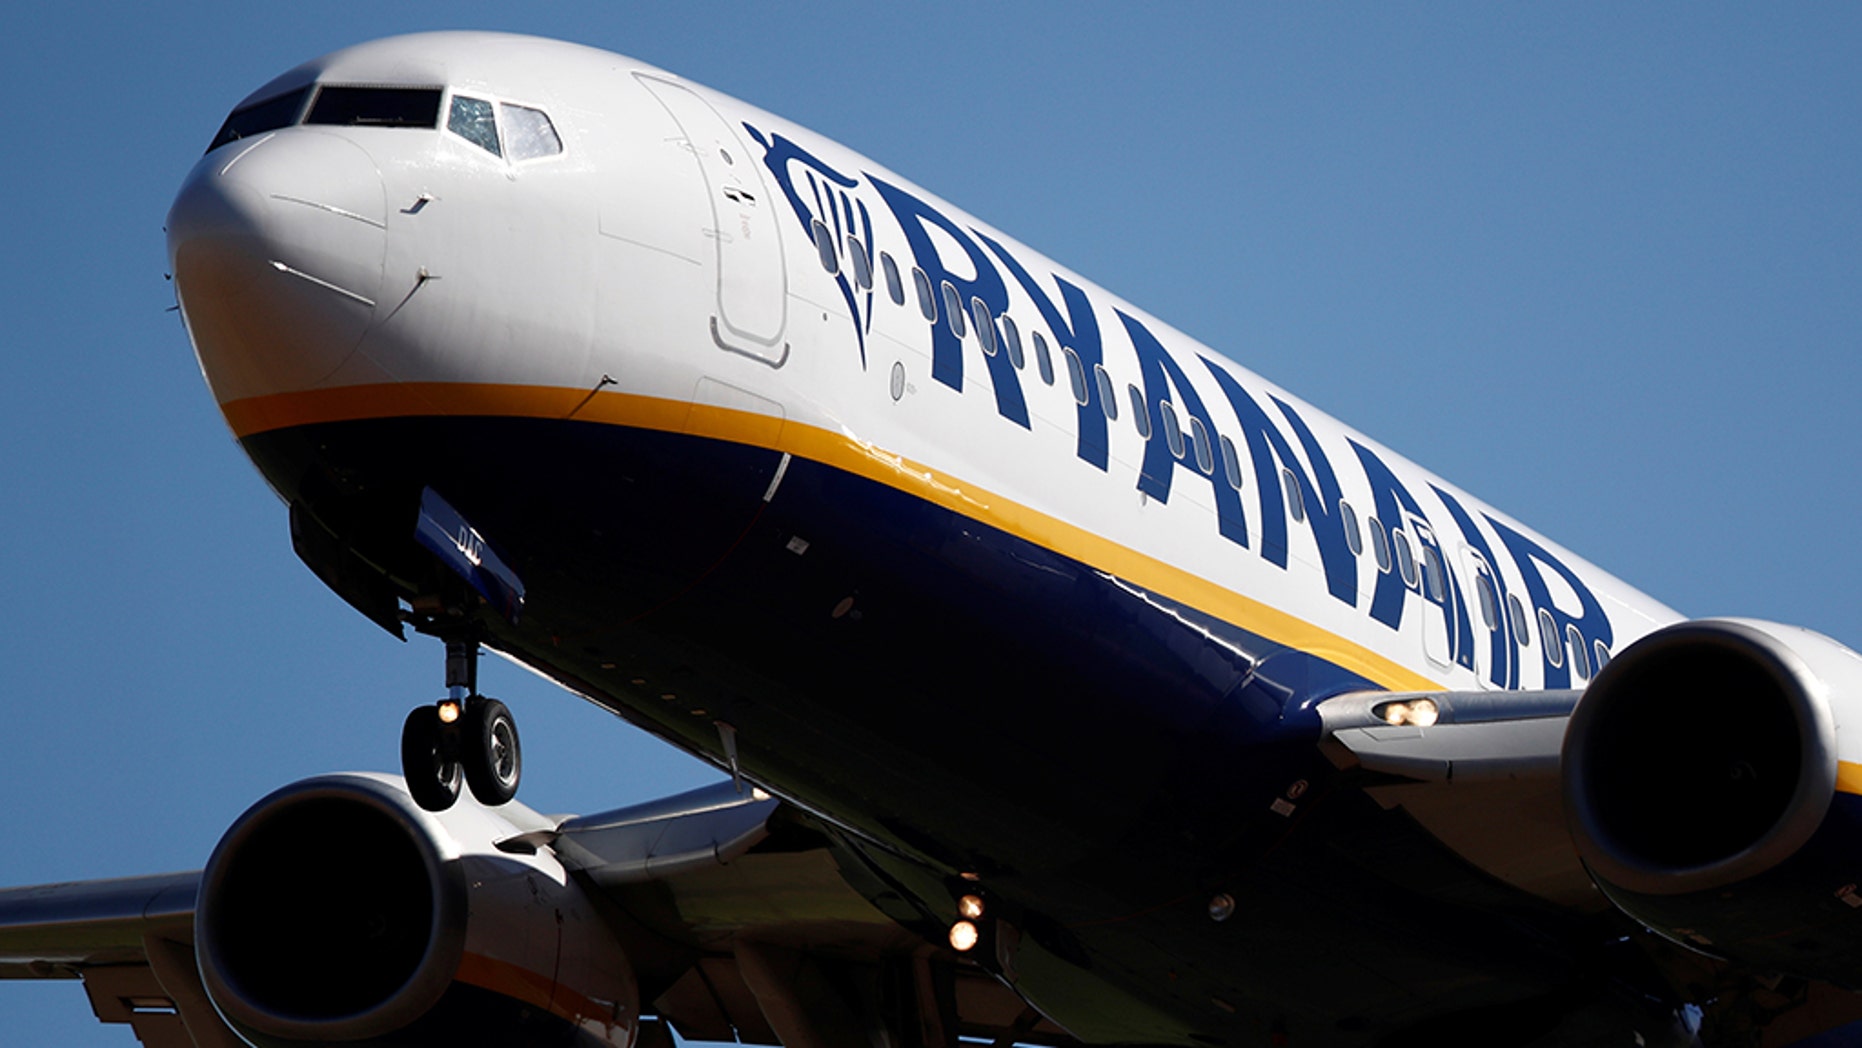 Elderly Ryanair passenger boards wrong flight, ends up nearly 2,000 miles away from destination